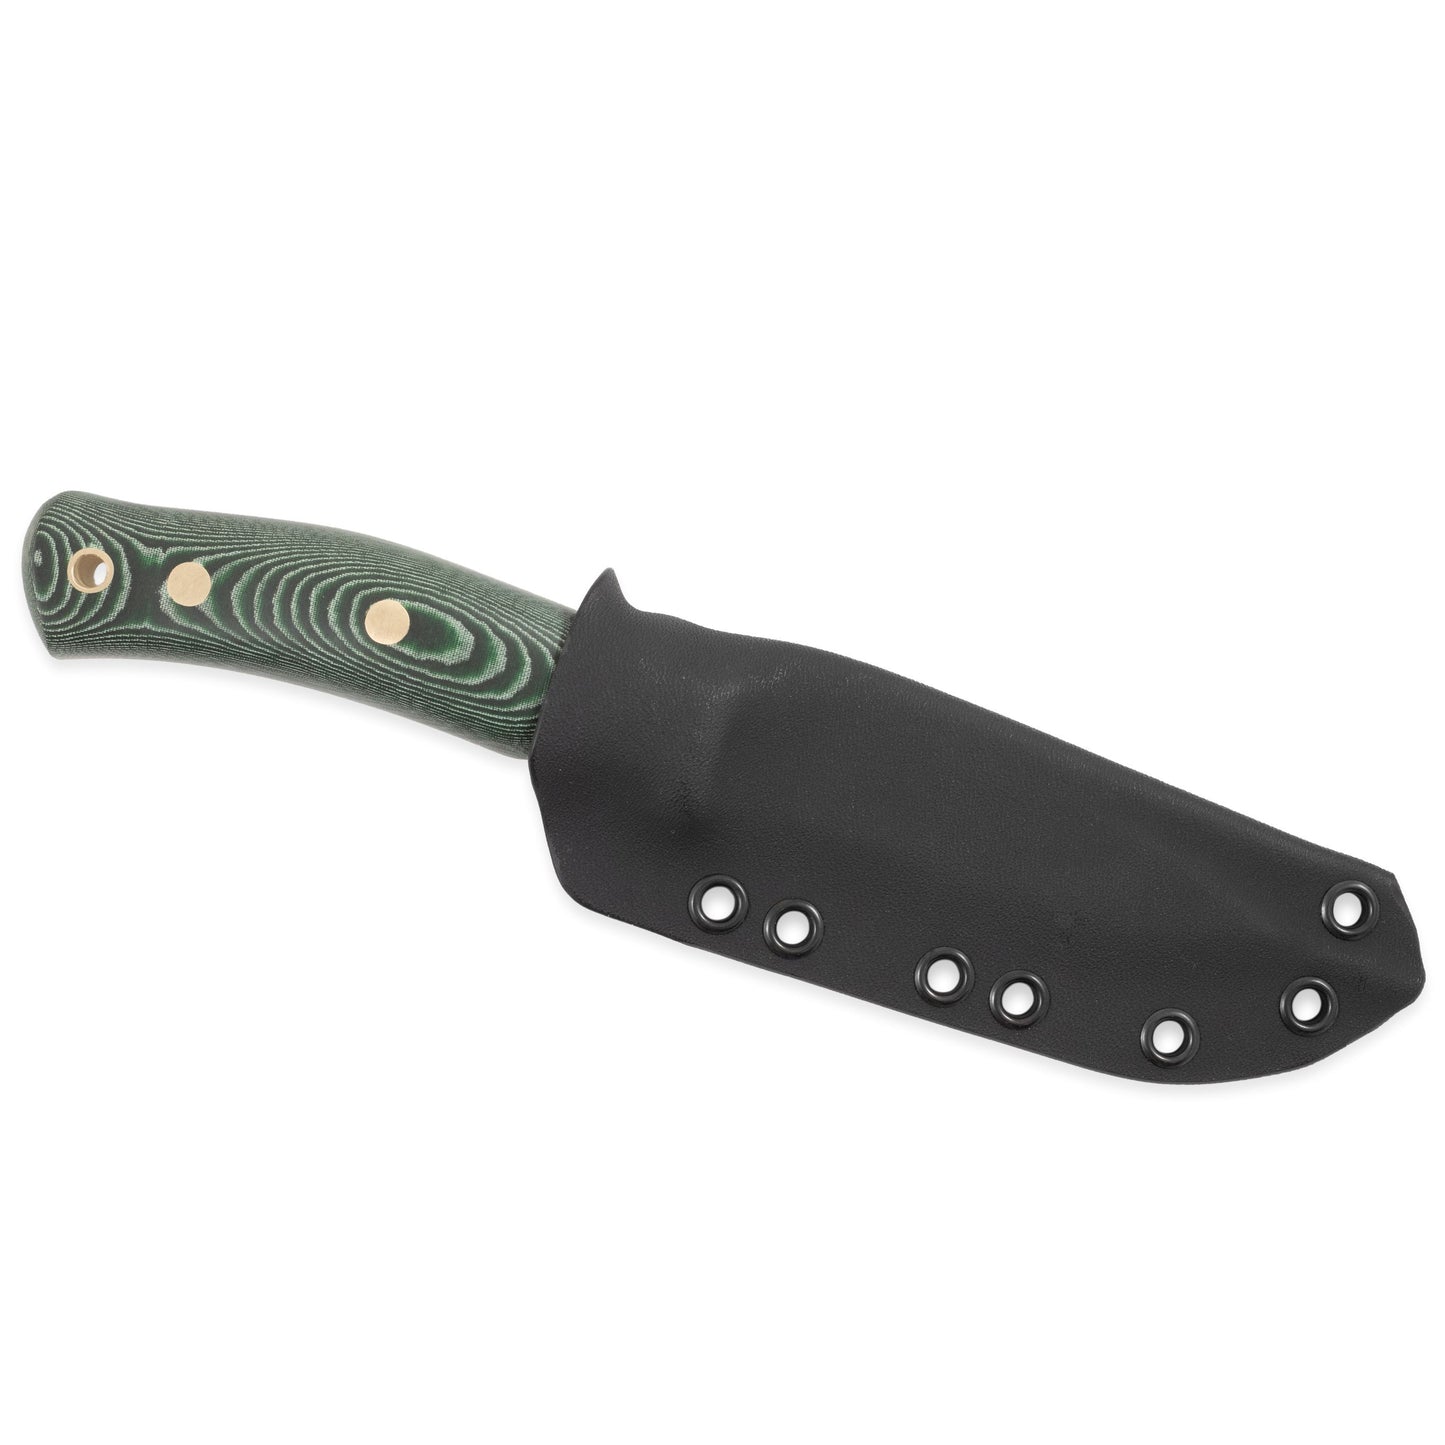 No.10 Swedish Forest Knife with Kydex Sheath